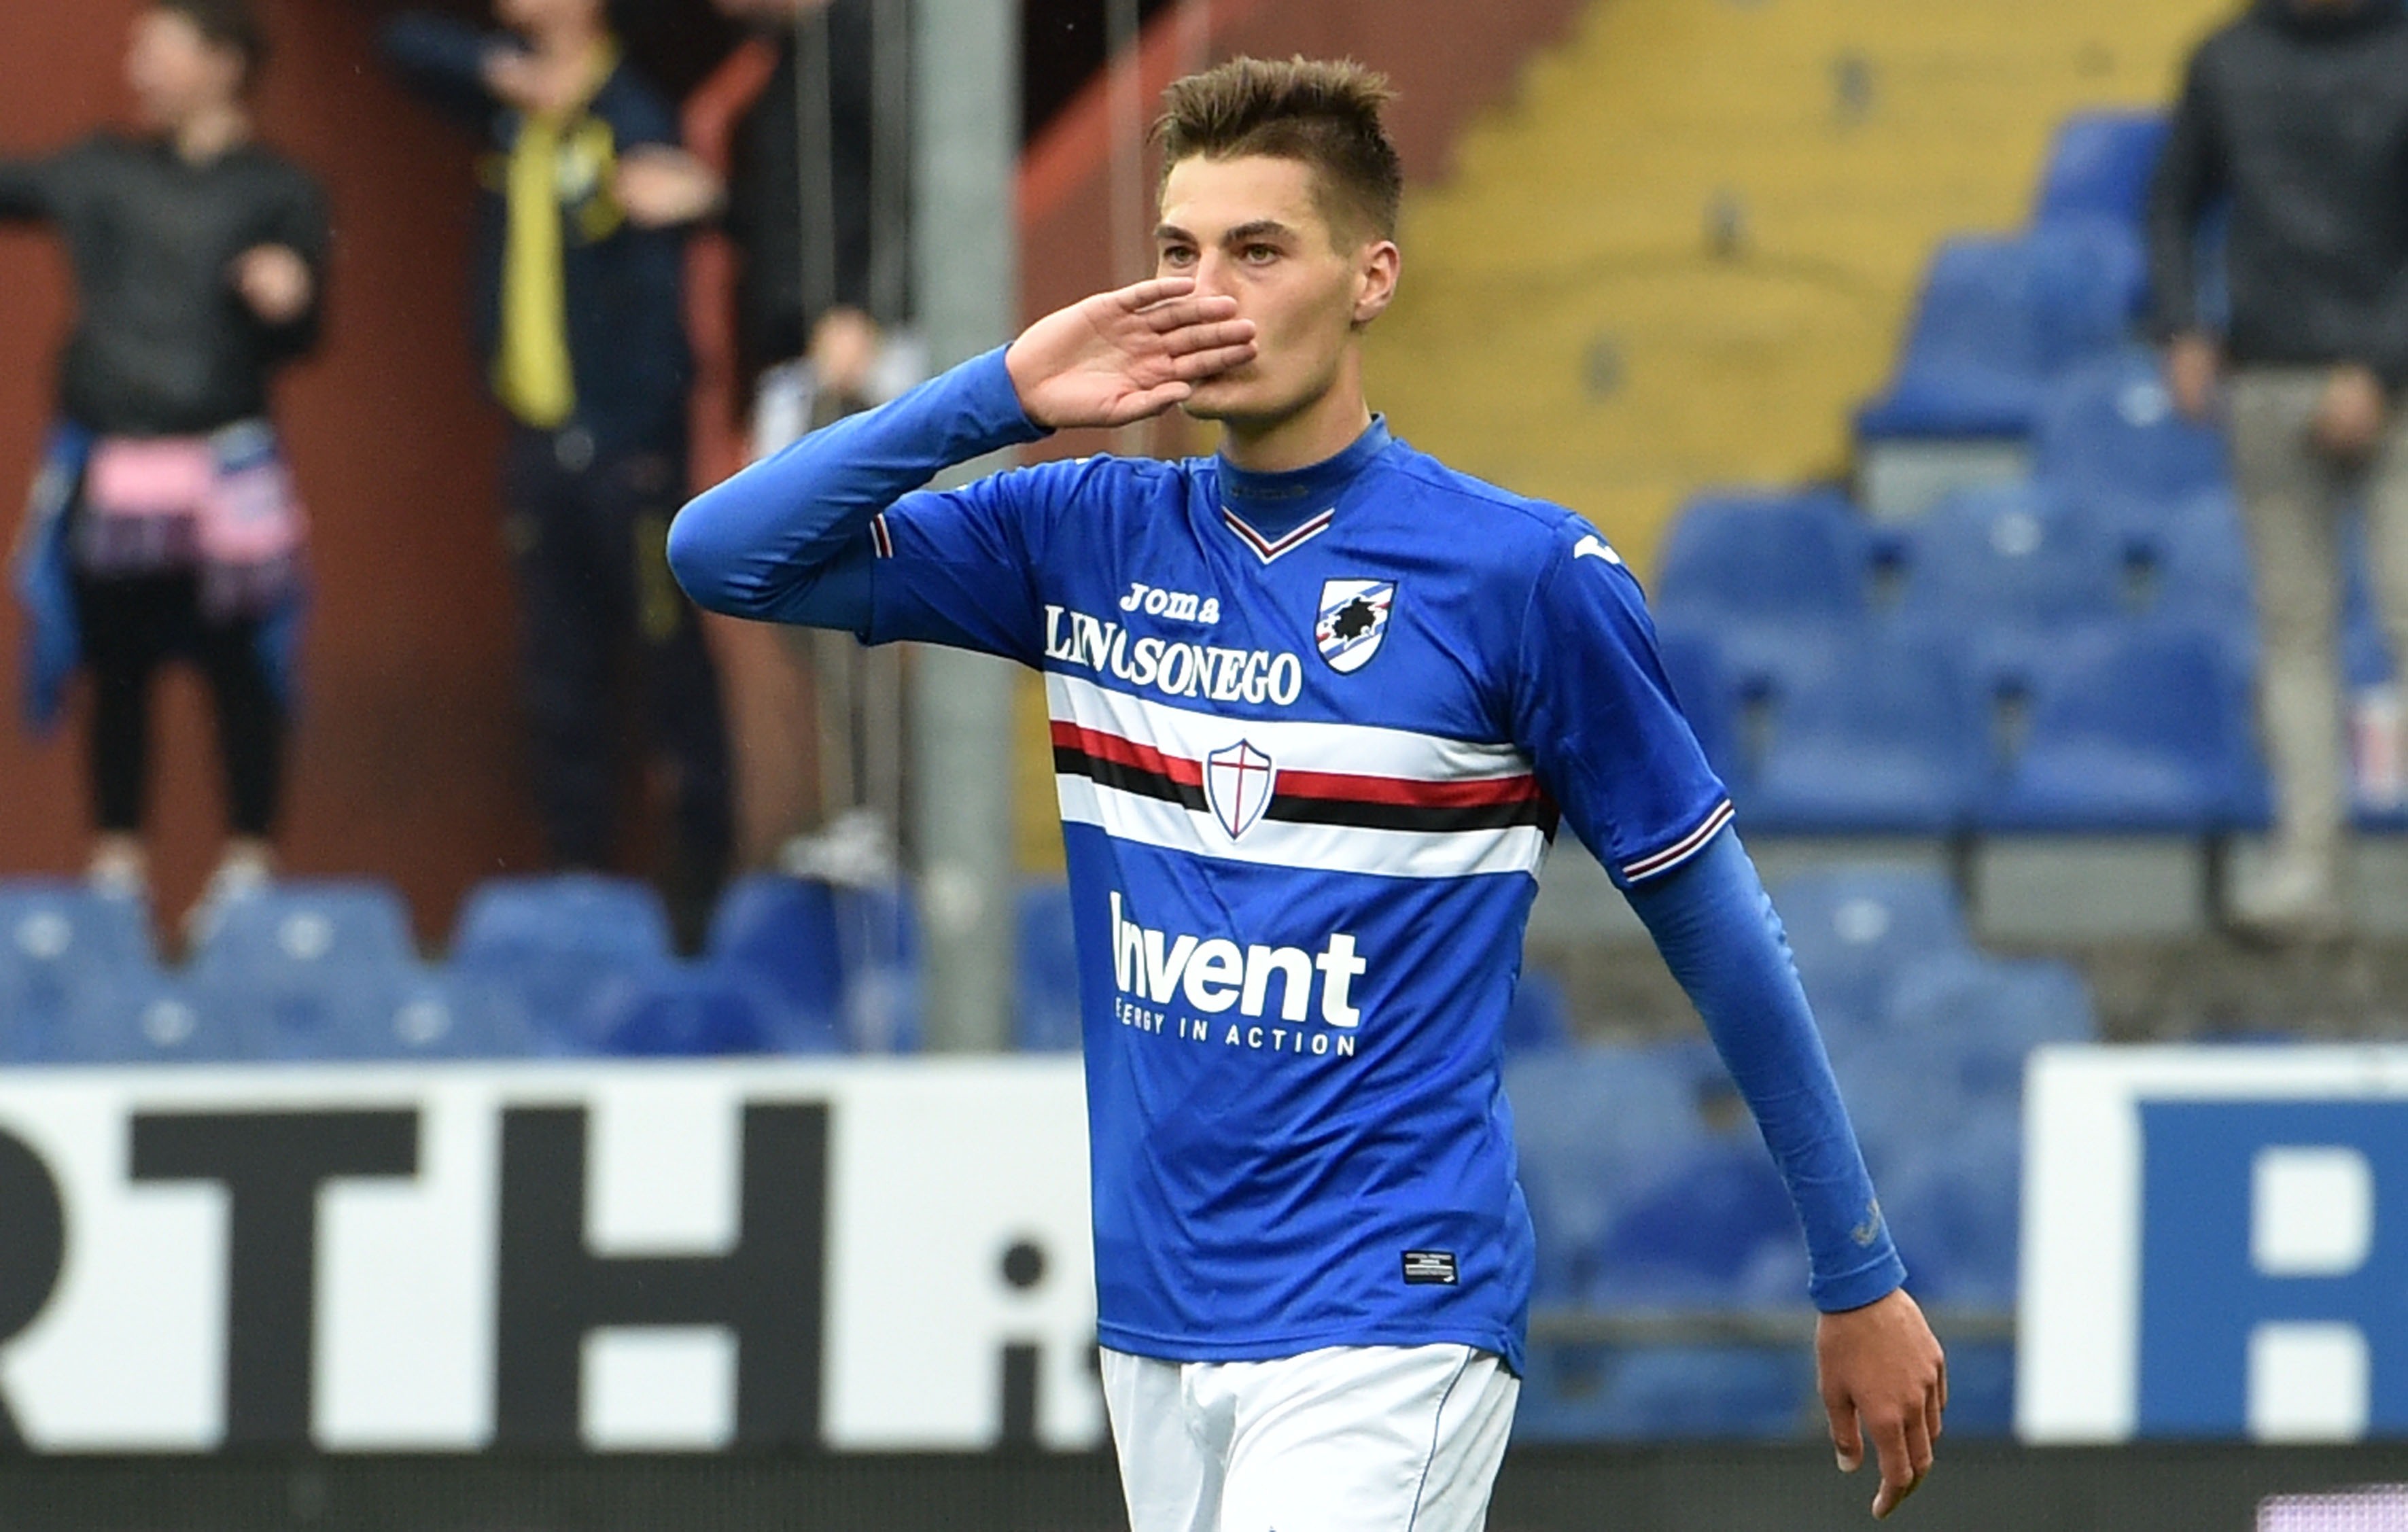 GDS – Agreement found for Patrik Schick, now it’s up to him